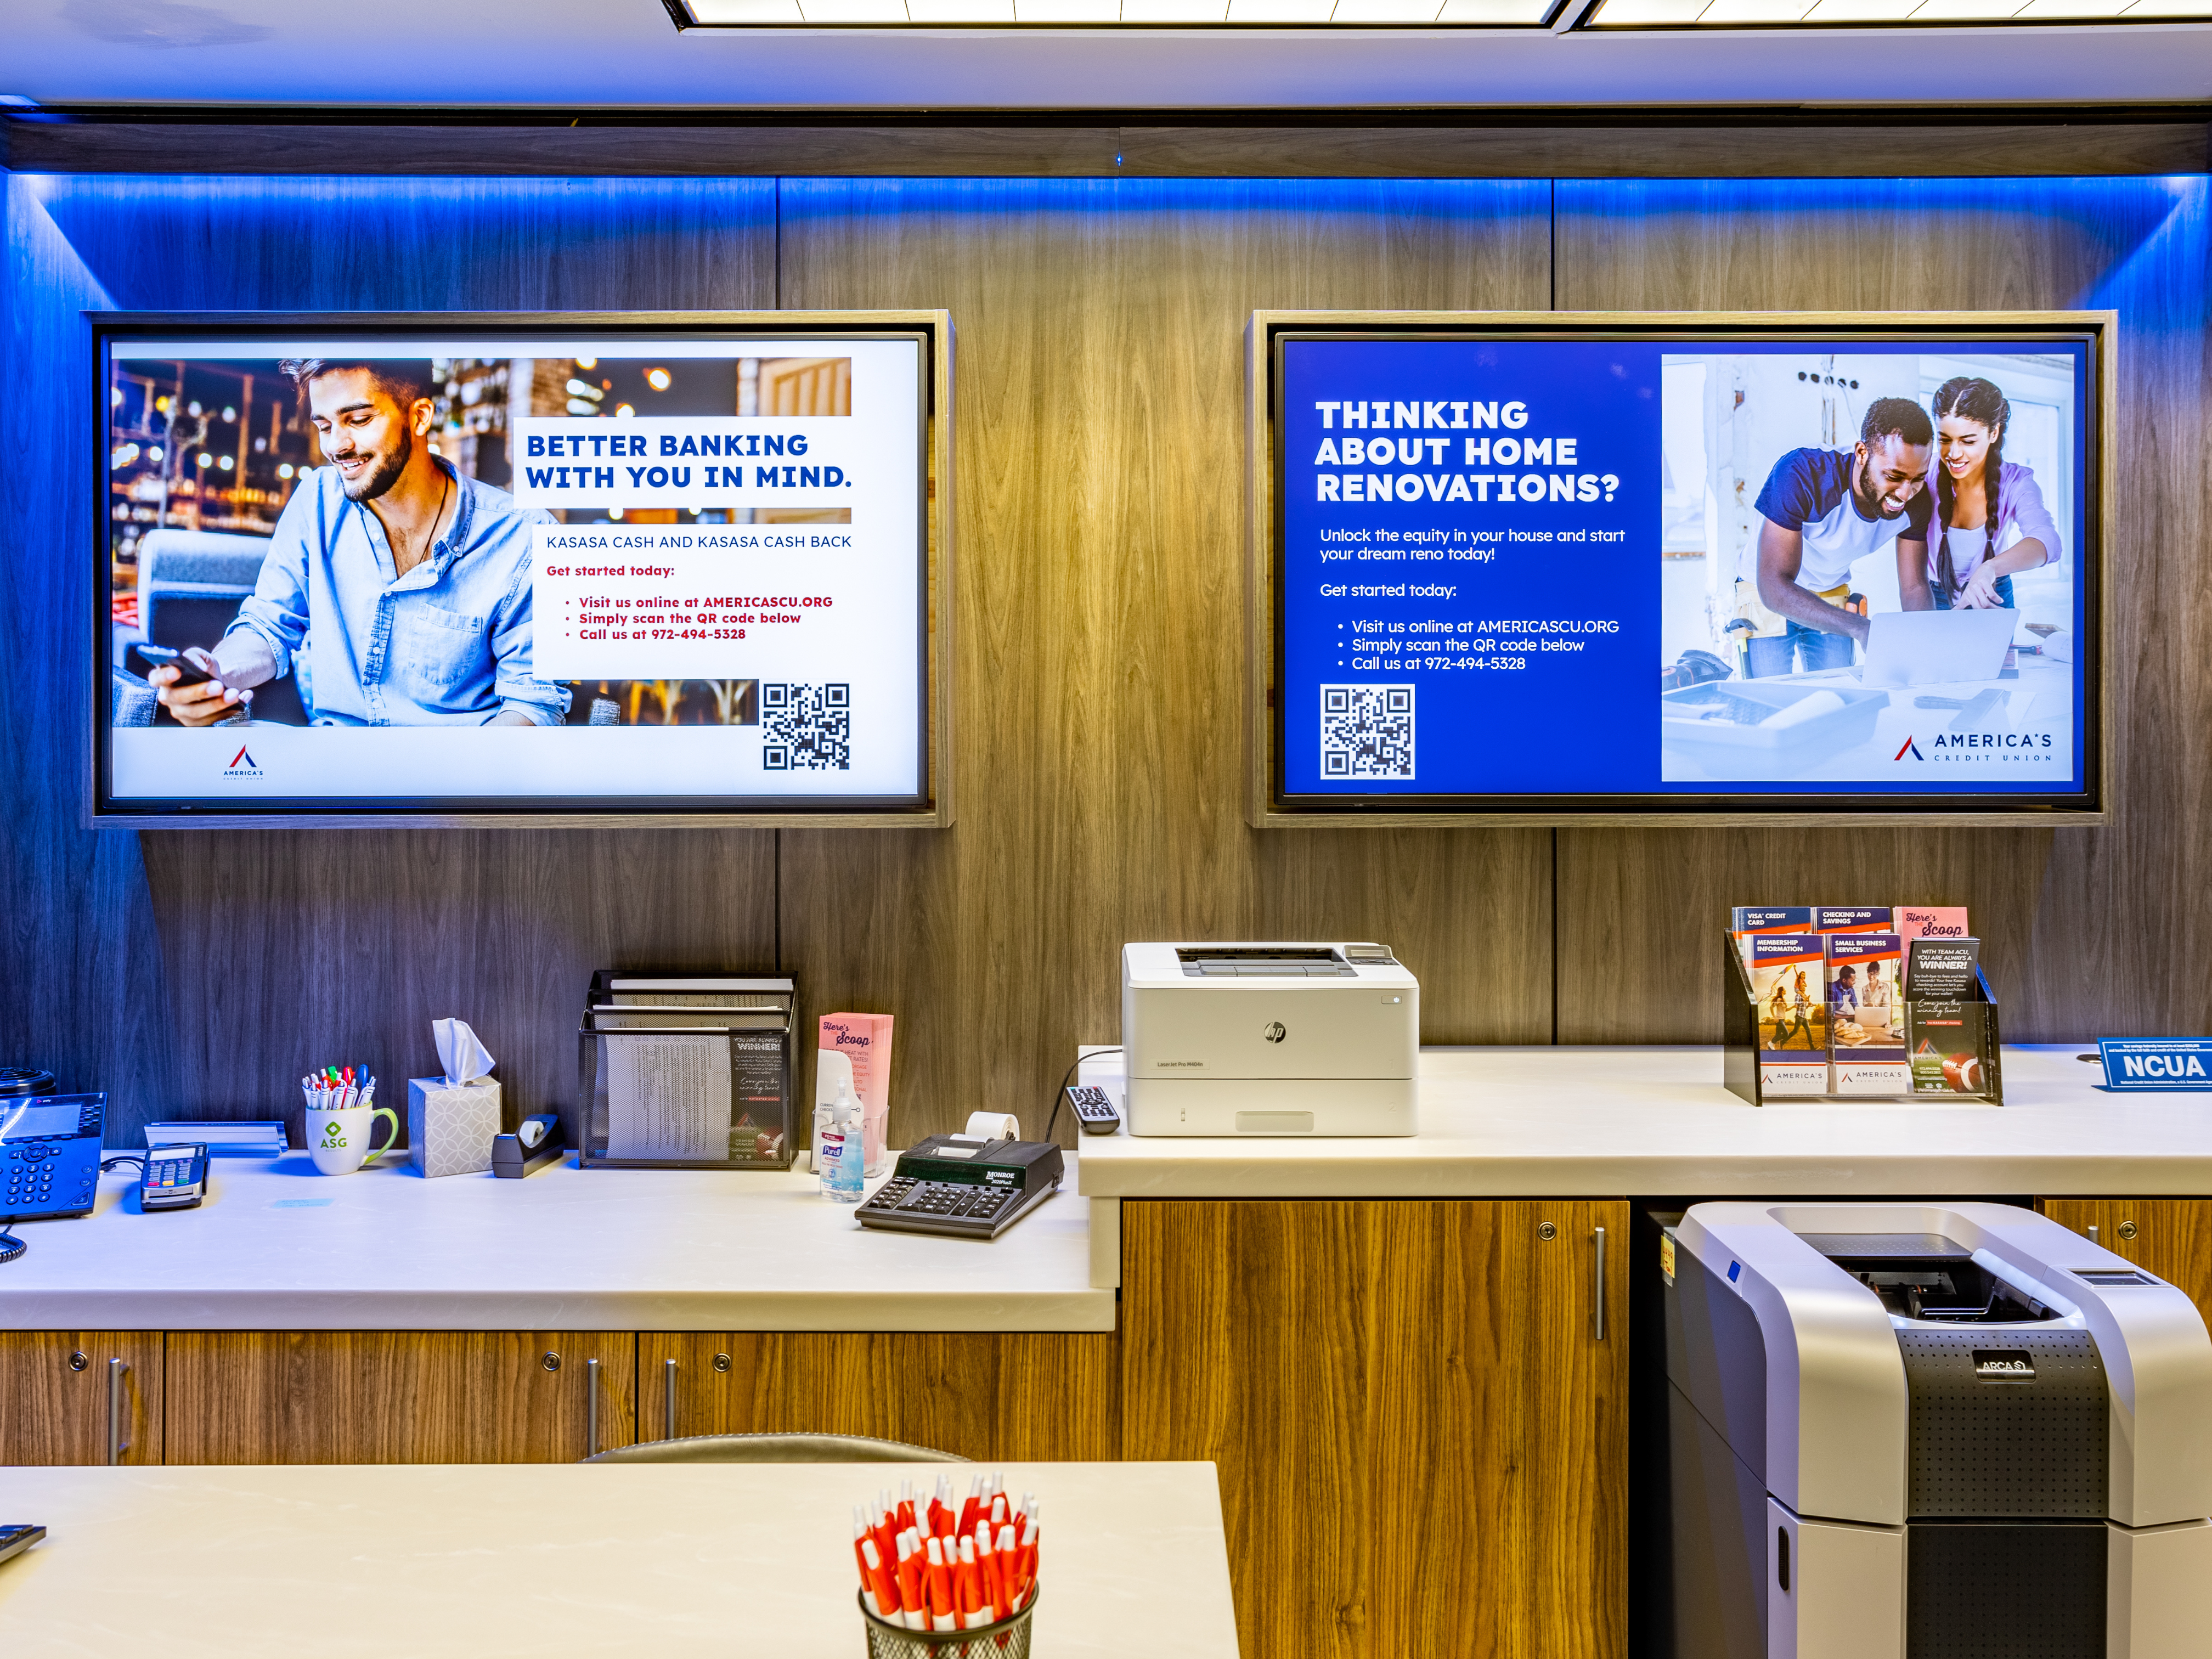 America's Digital Signage and TCR